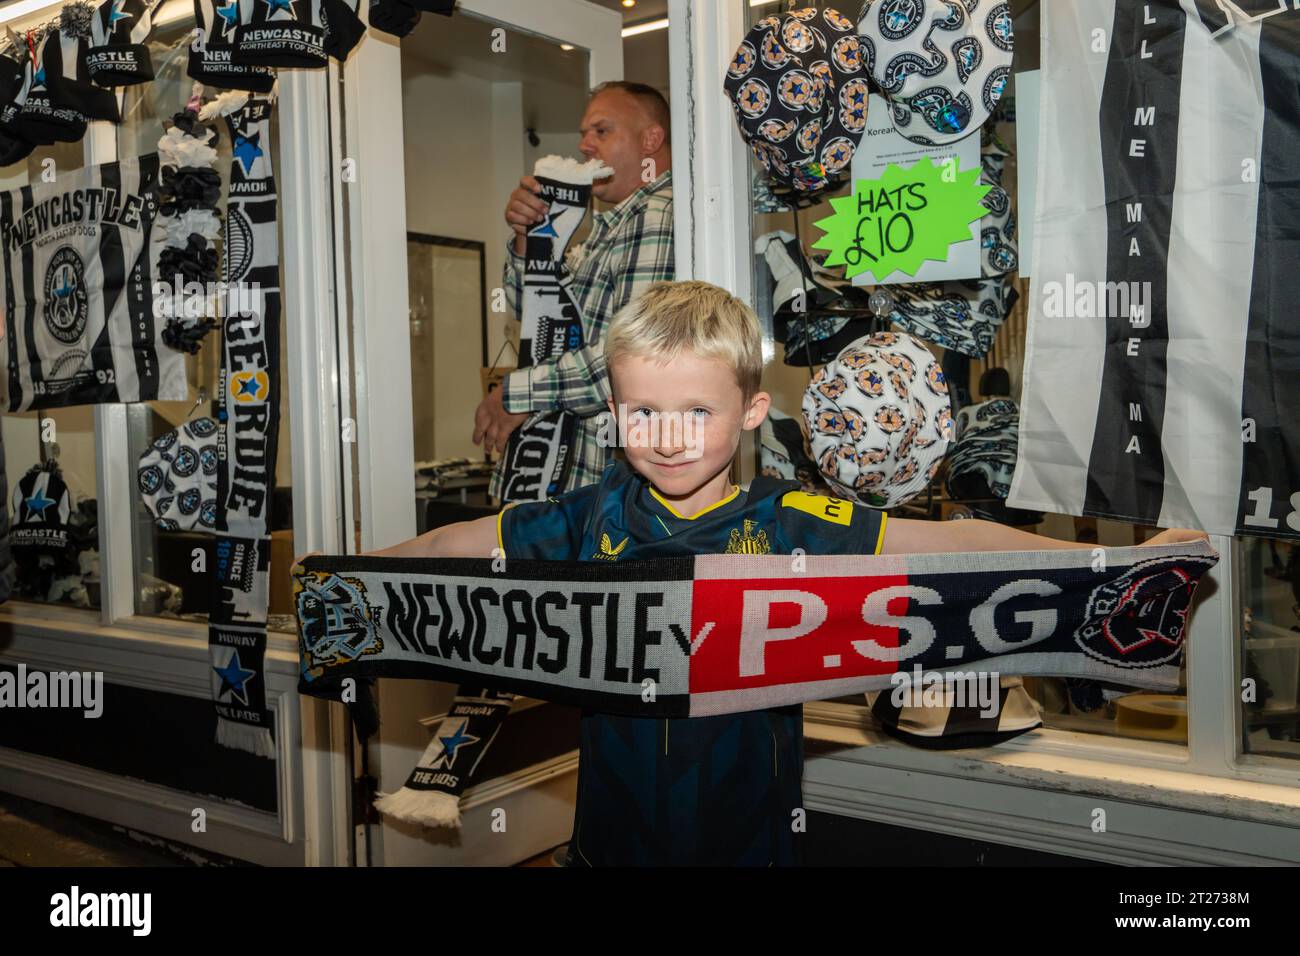 A young fan in the street ahead of the Newcastle United v PSG - Paris Saint Germain UEFA Champions League match in Newcastle upon Tyne, UK Stock Photo